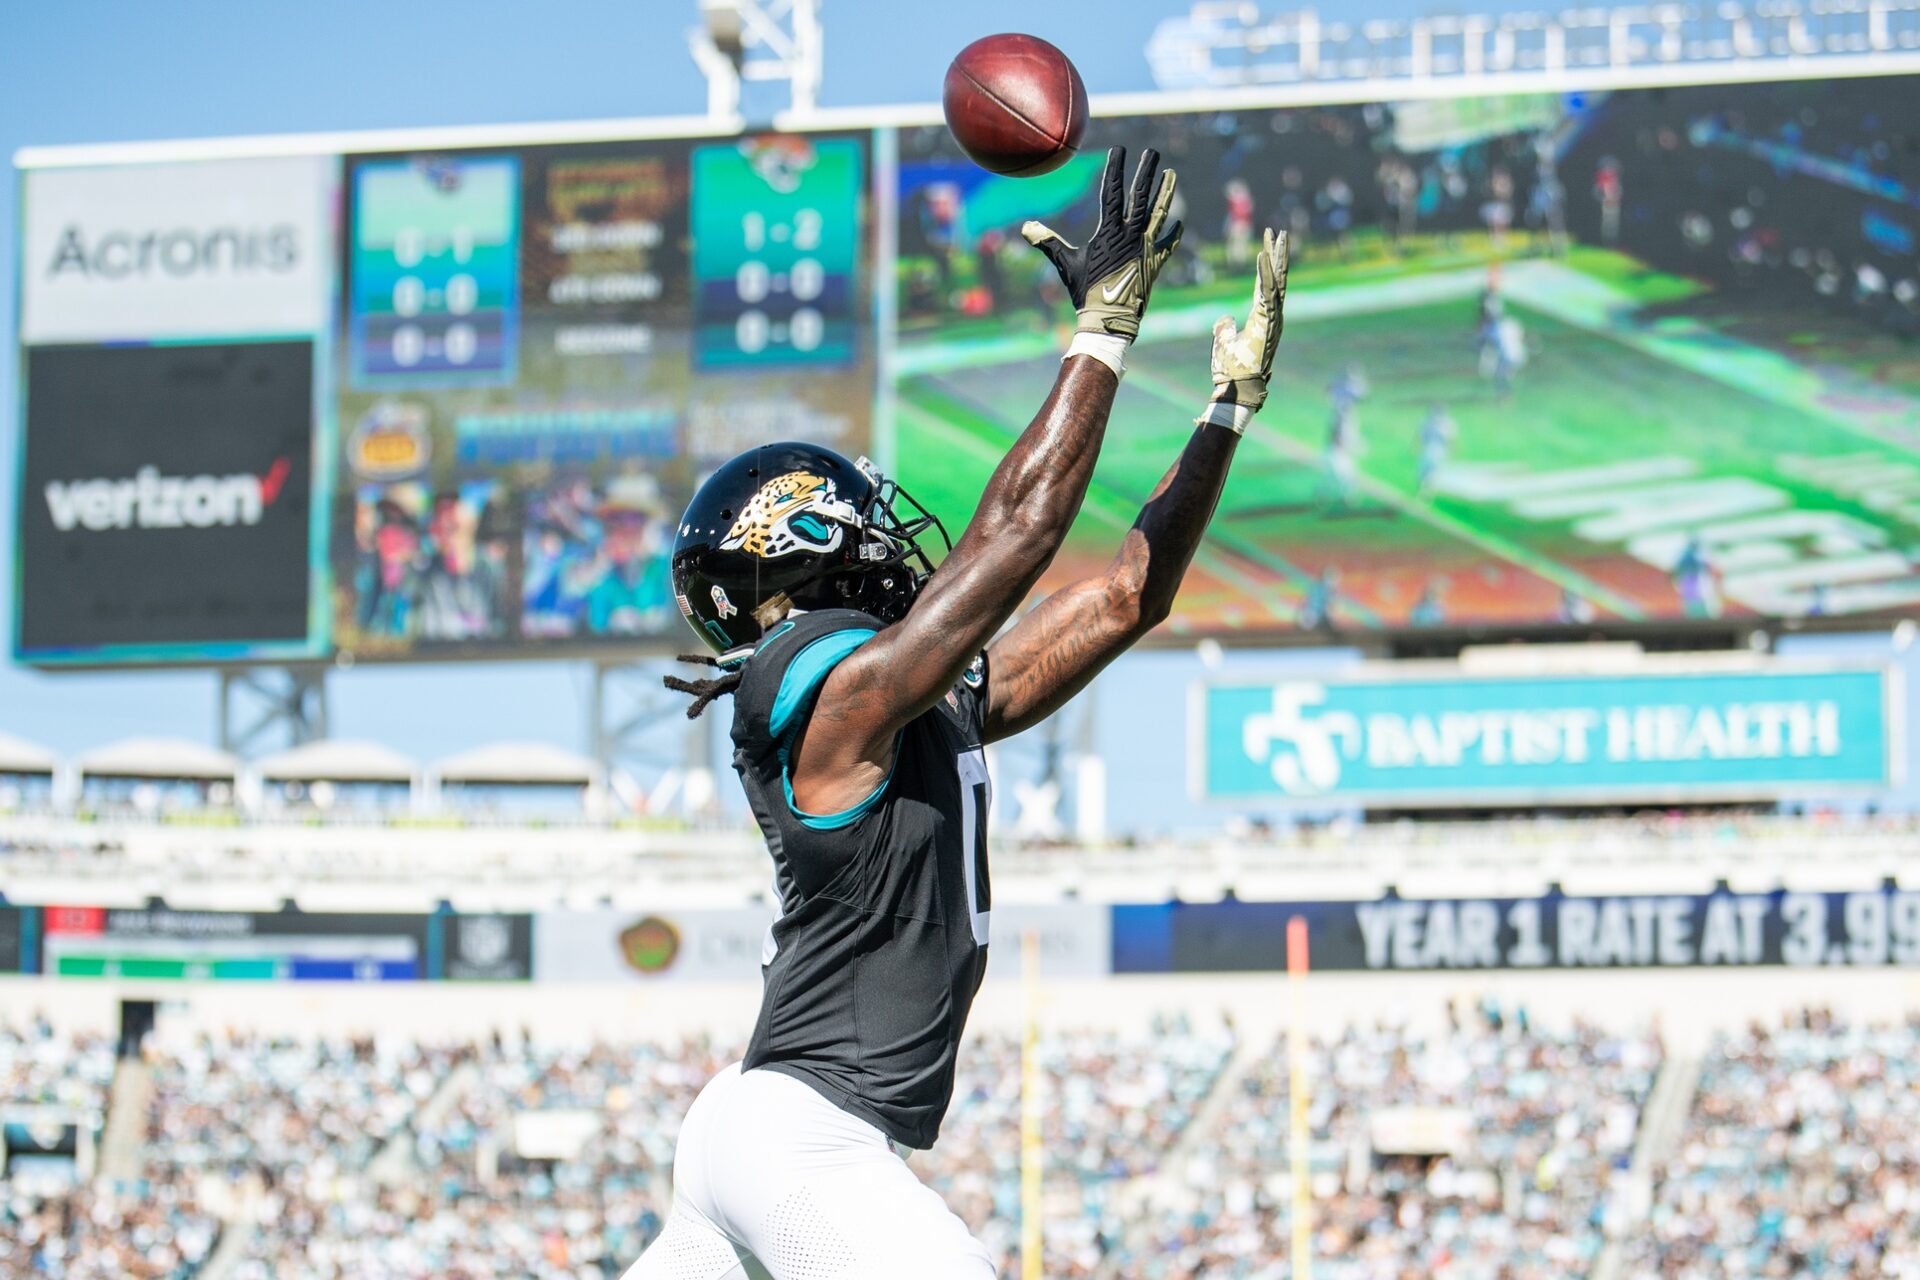 Jacksonville Jaguars wide receiver Calvin Ridley (0) makes the catch for a touchdown against the Tennessee Titans in the first quarter at EverBank Stadium.